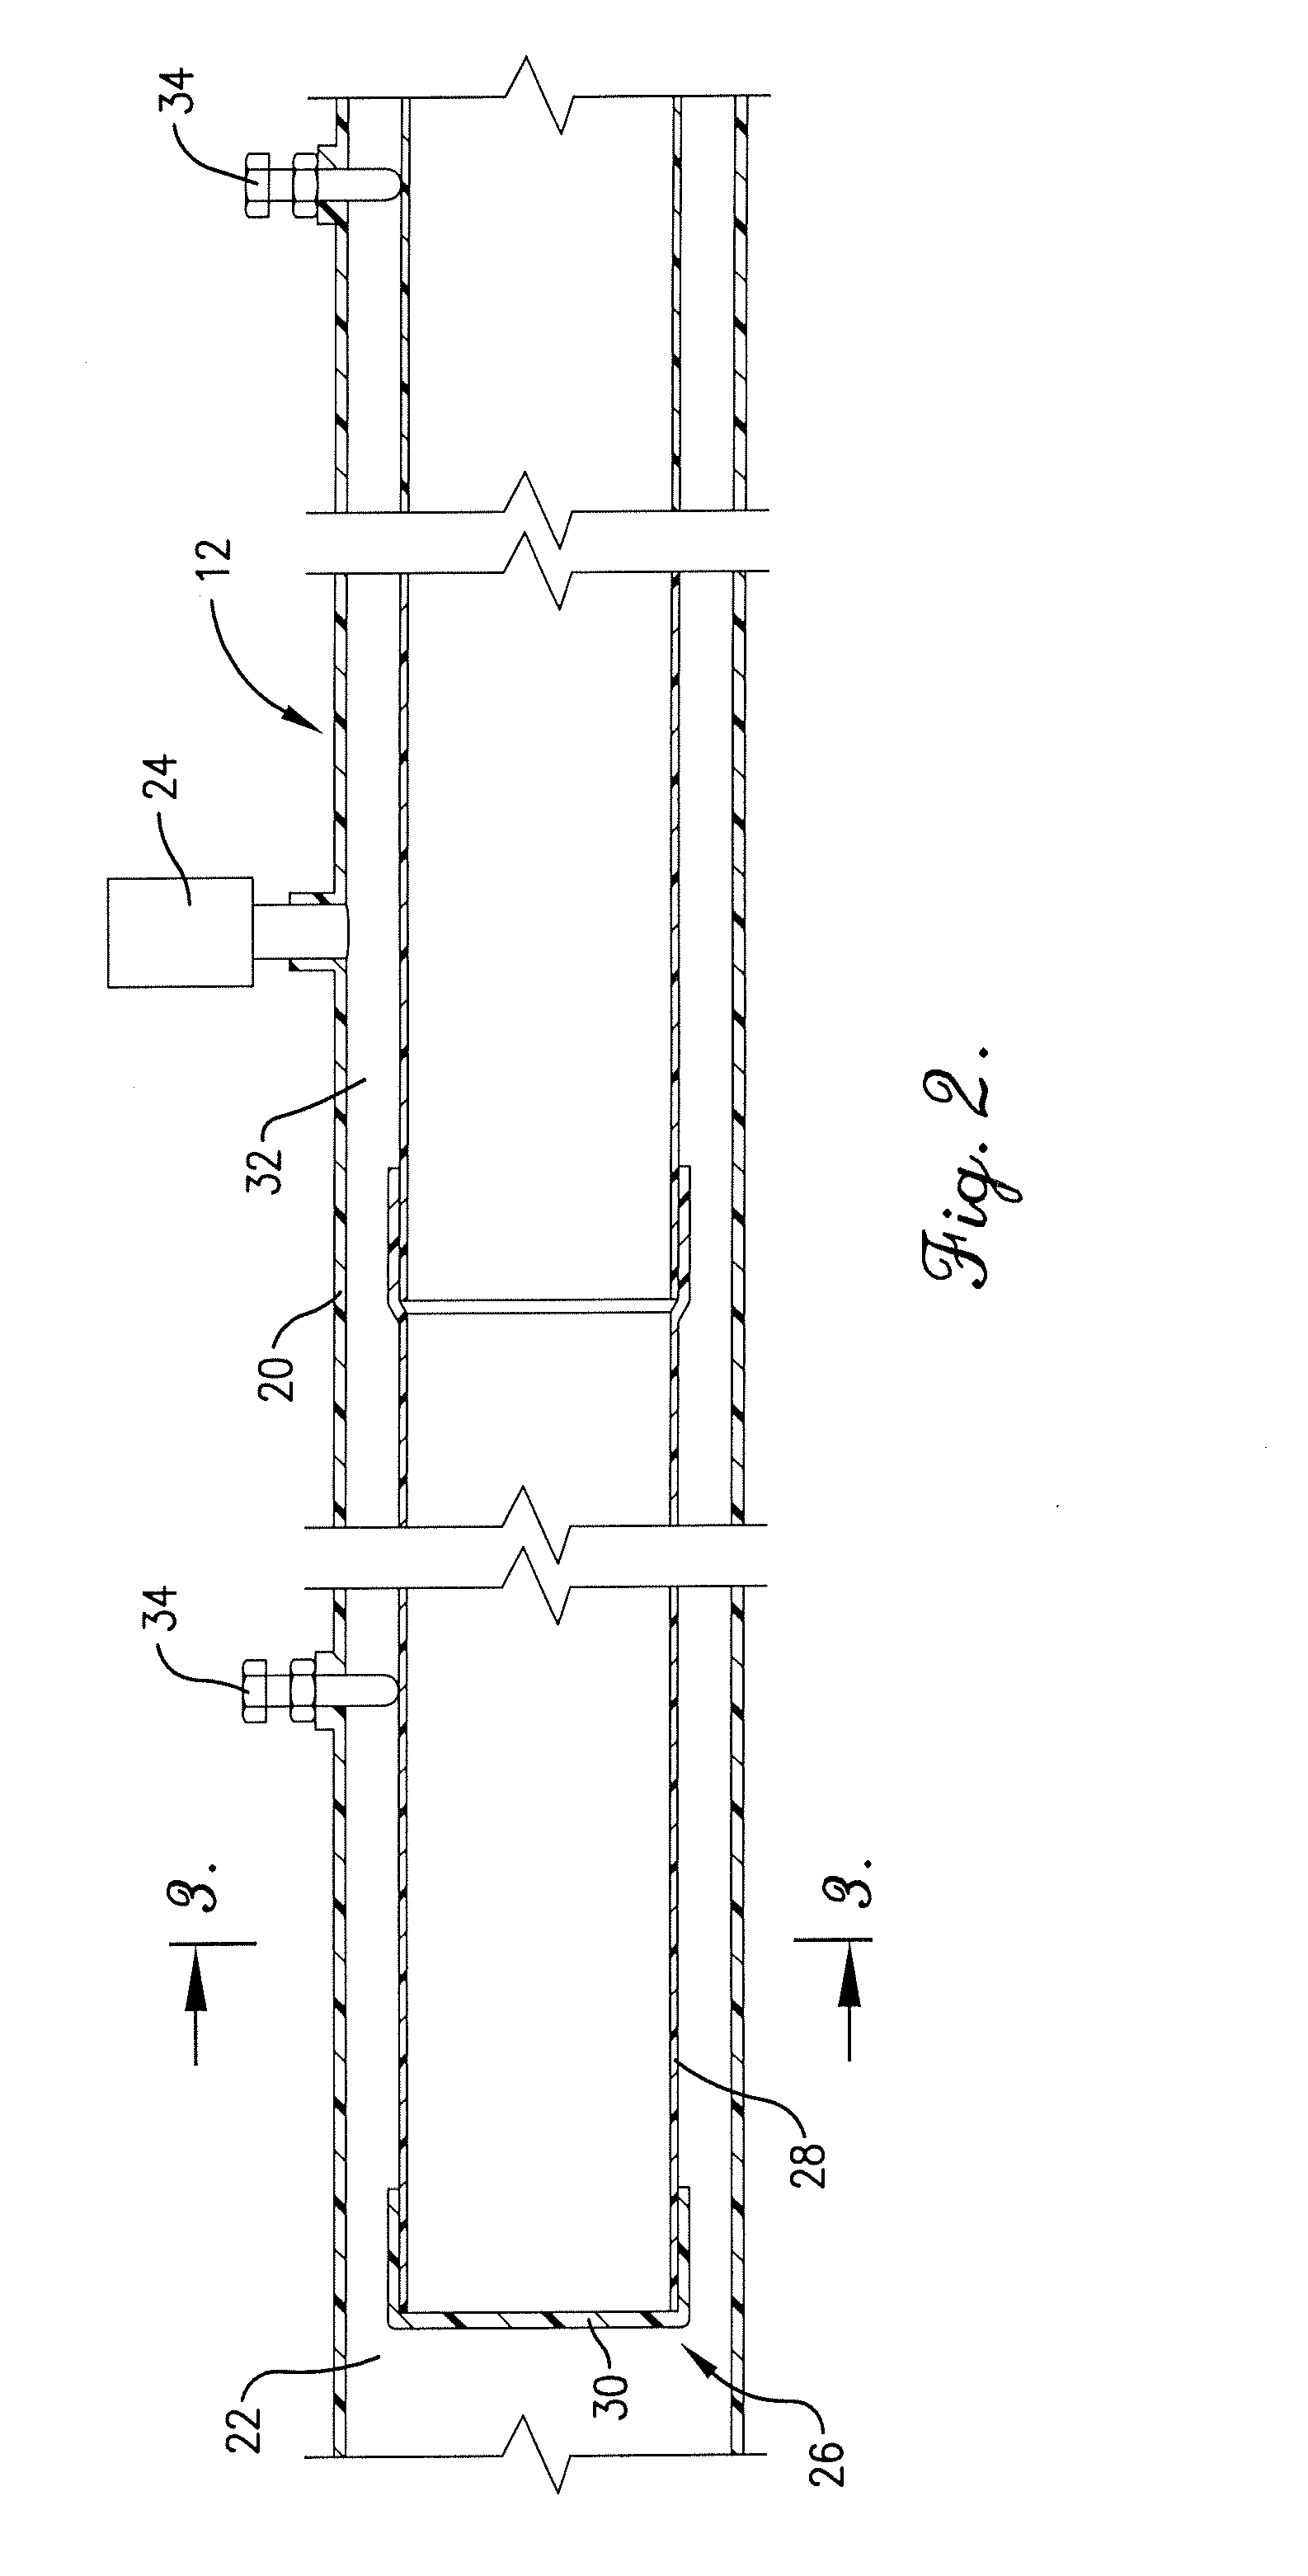 Volume Displacement System for Irrigation Span